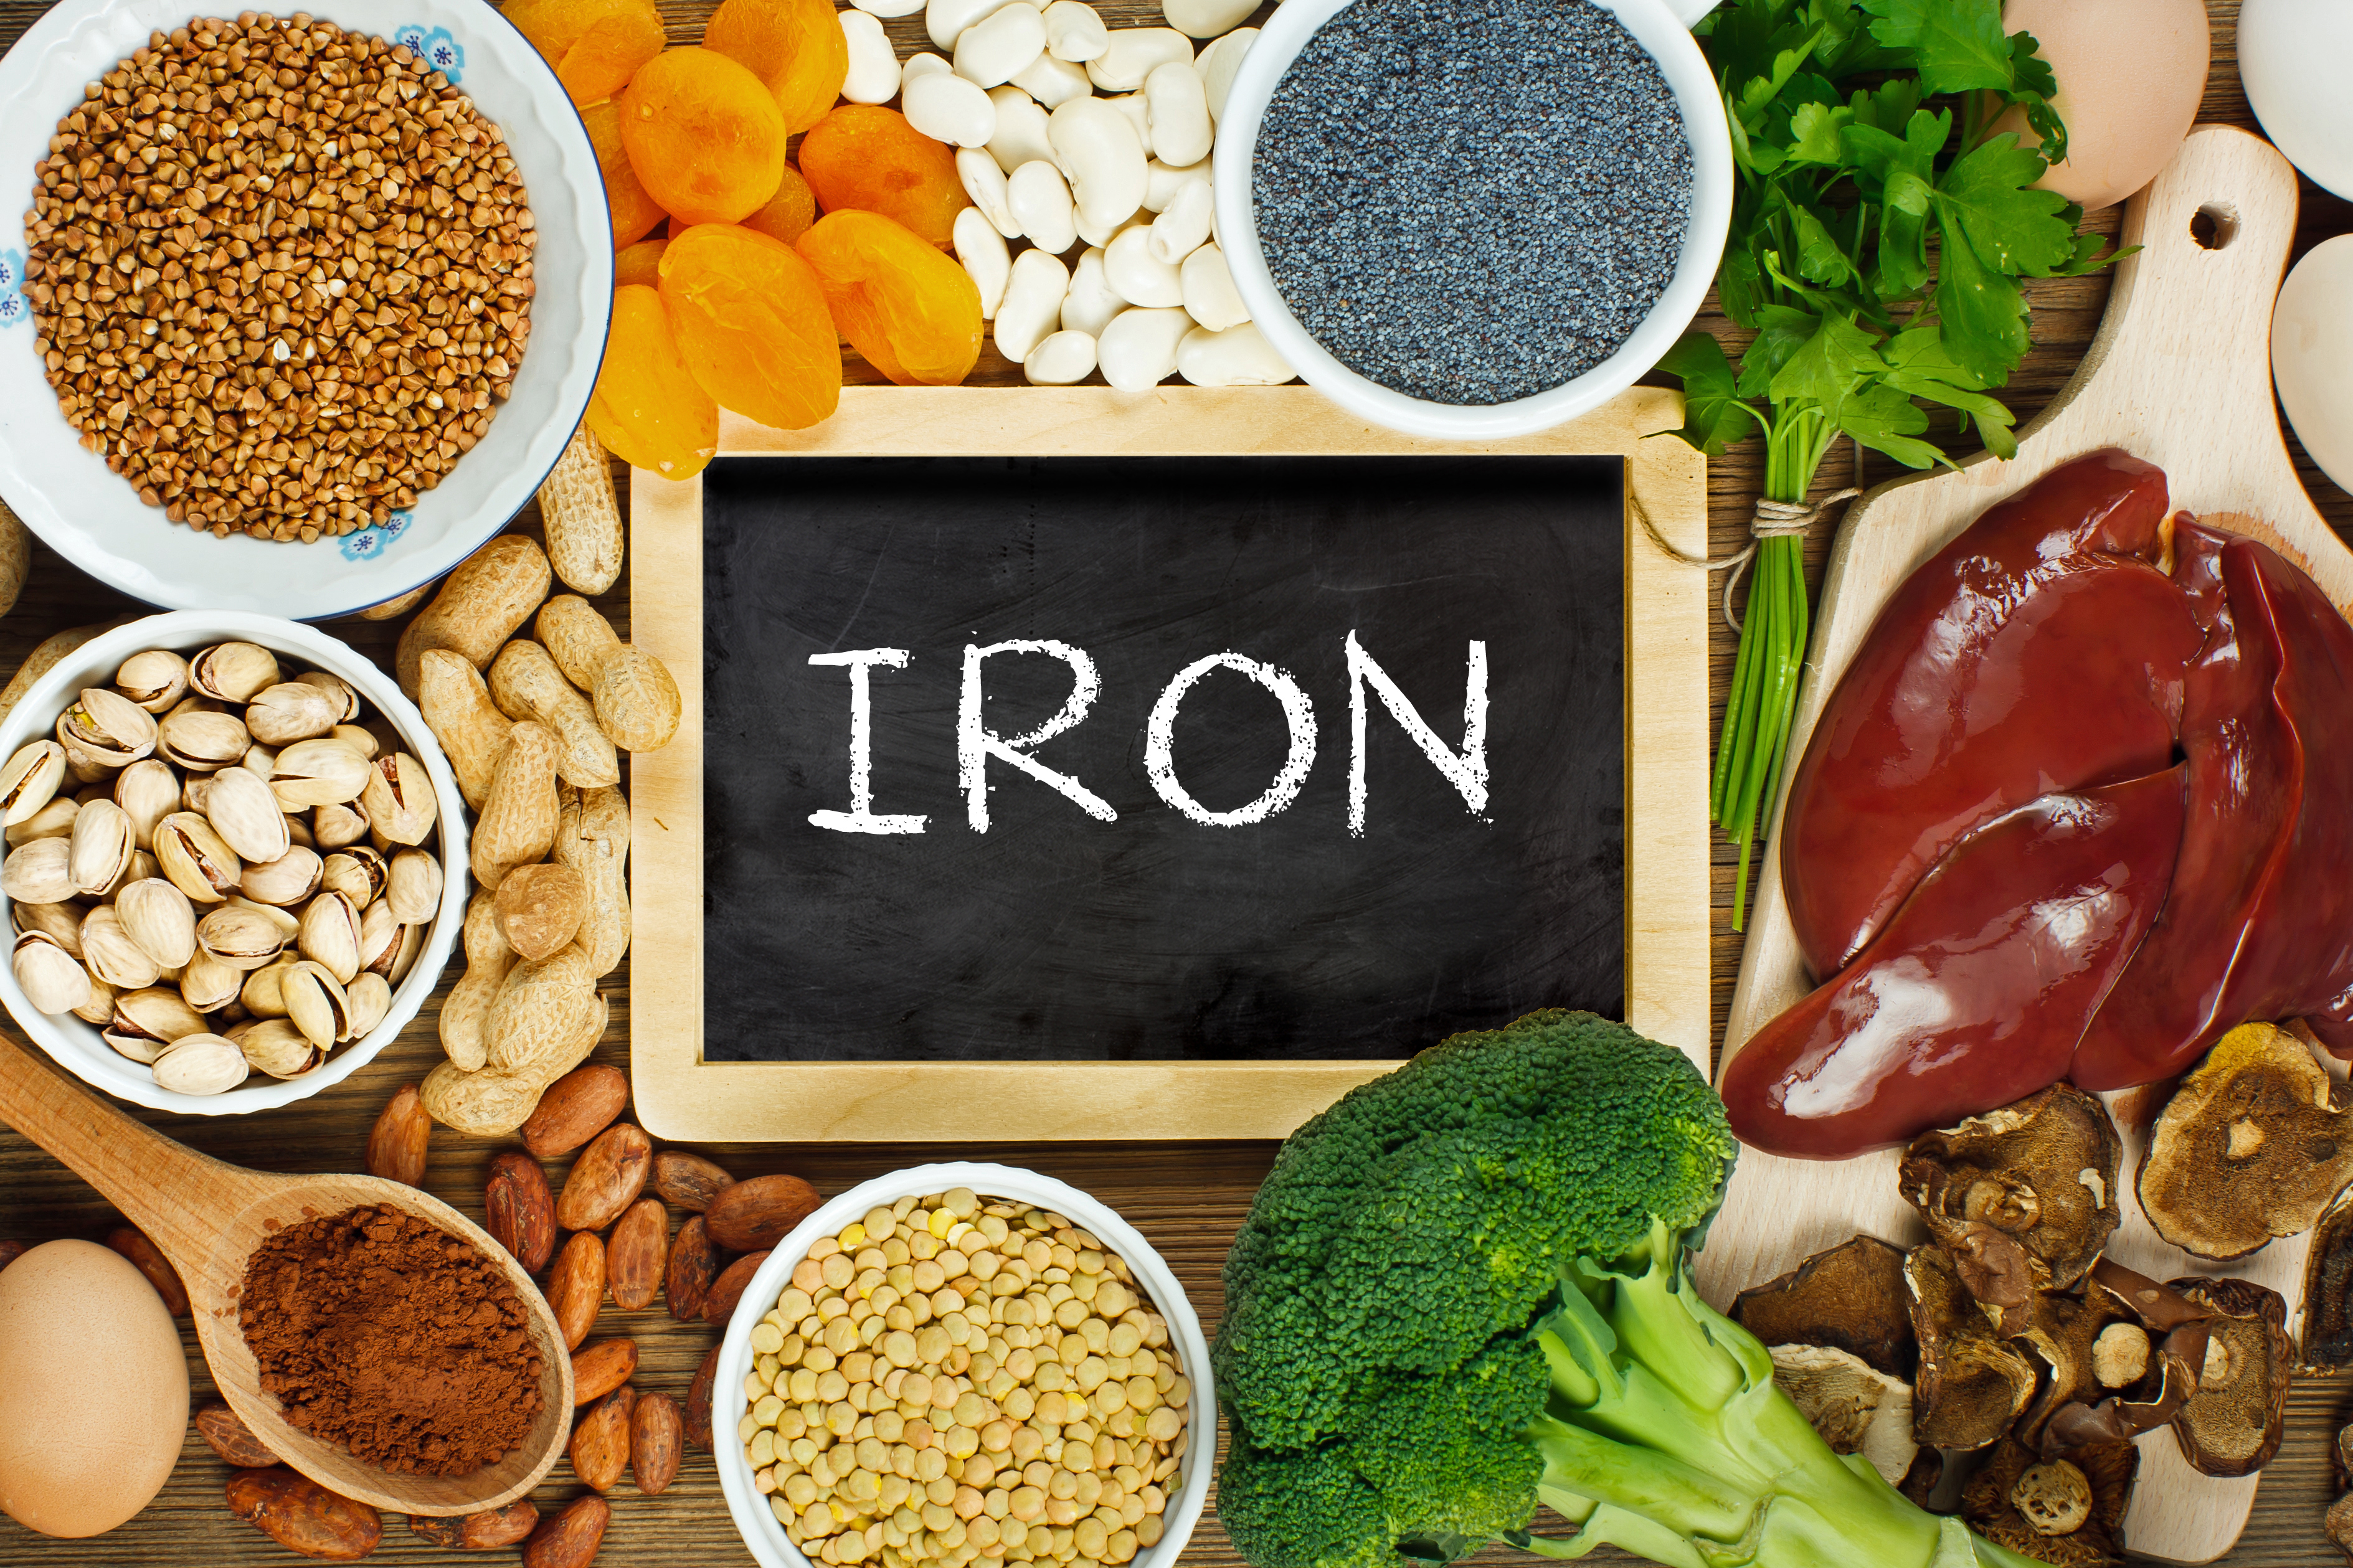 Collection of iron rich foods such as liver, buckwheat, eggs, parsley leaves, dried apricots, cocoa, lentil, bean, blue poppy seed, broccoli, dried mushrooms, peanuts and pistachios on wooden table.